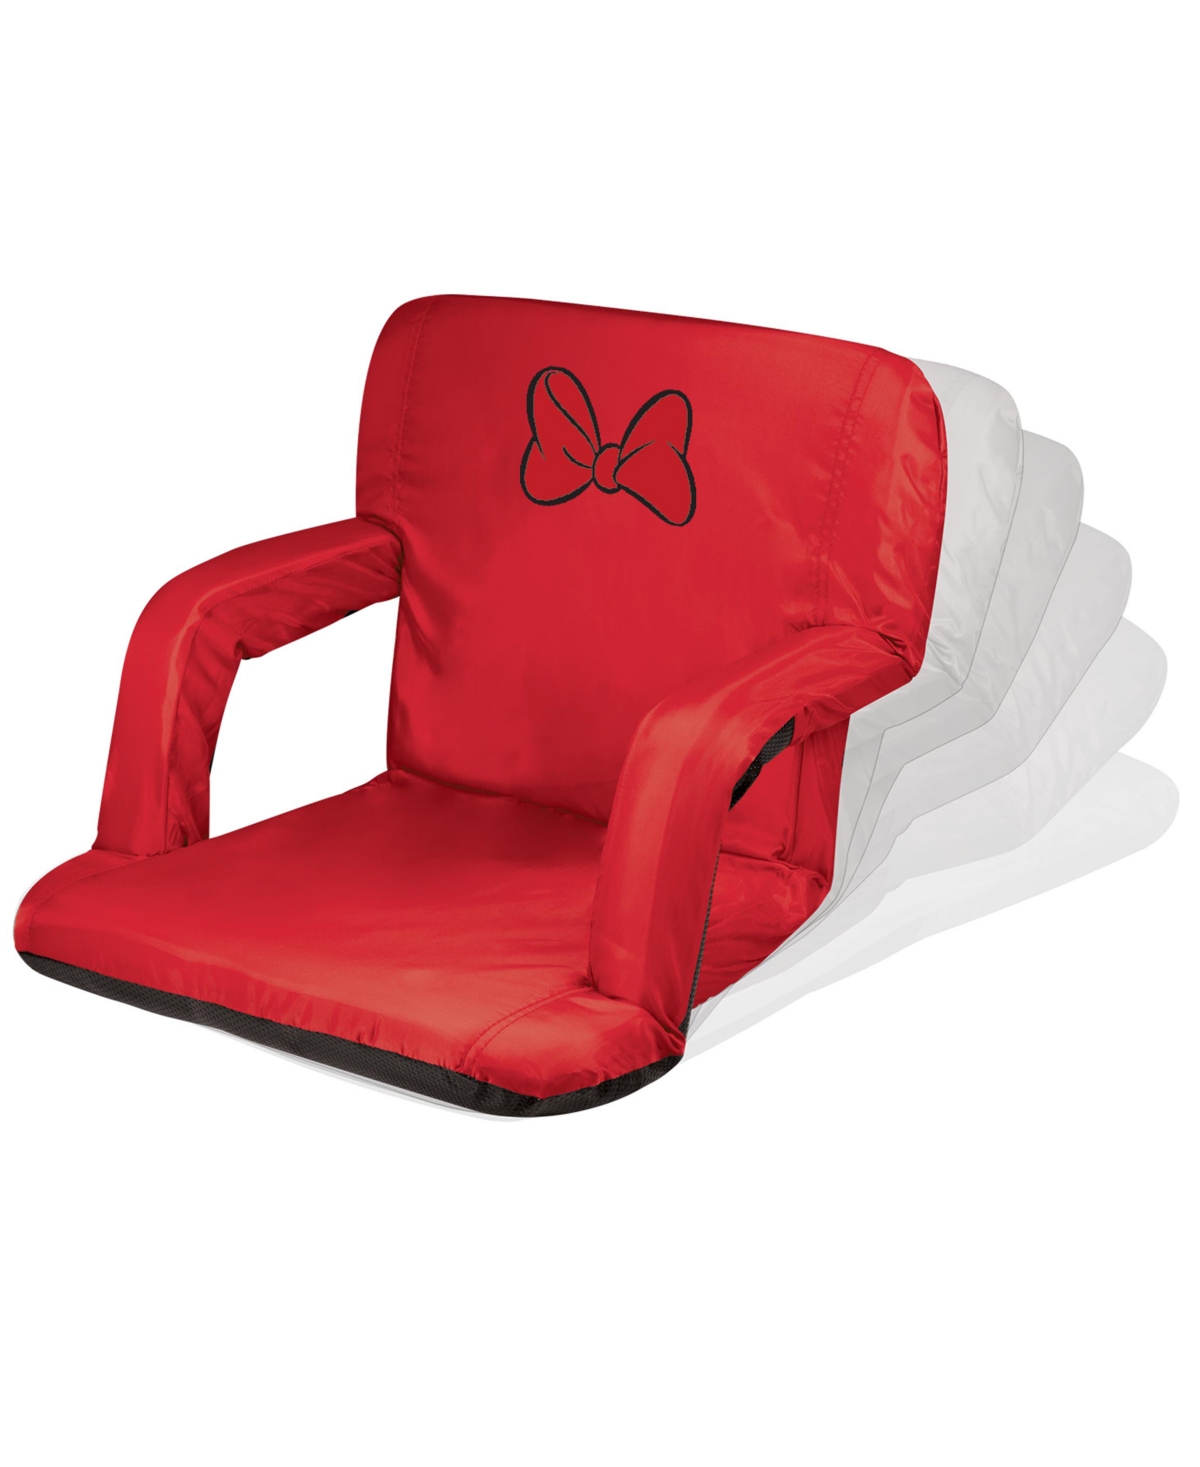 Oniva by Picnic Time Disney's Minnie Mouse Ventura Portable Reclining Stadium Seat - Red